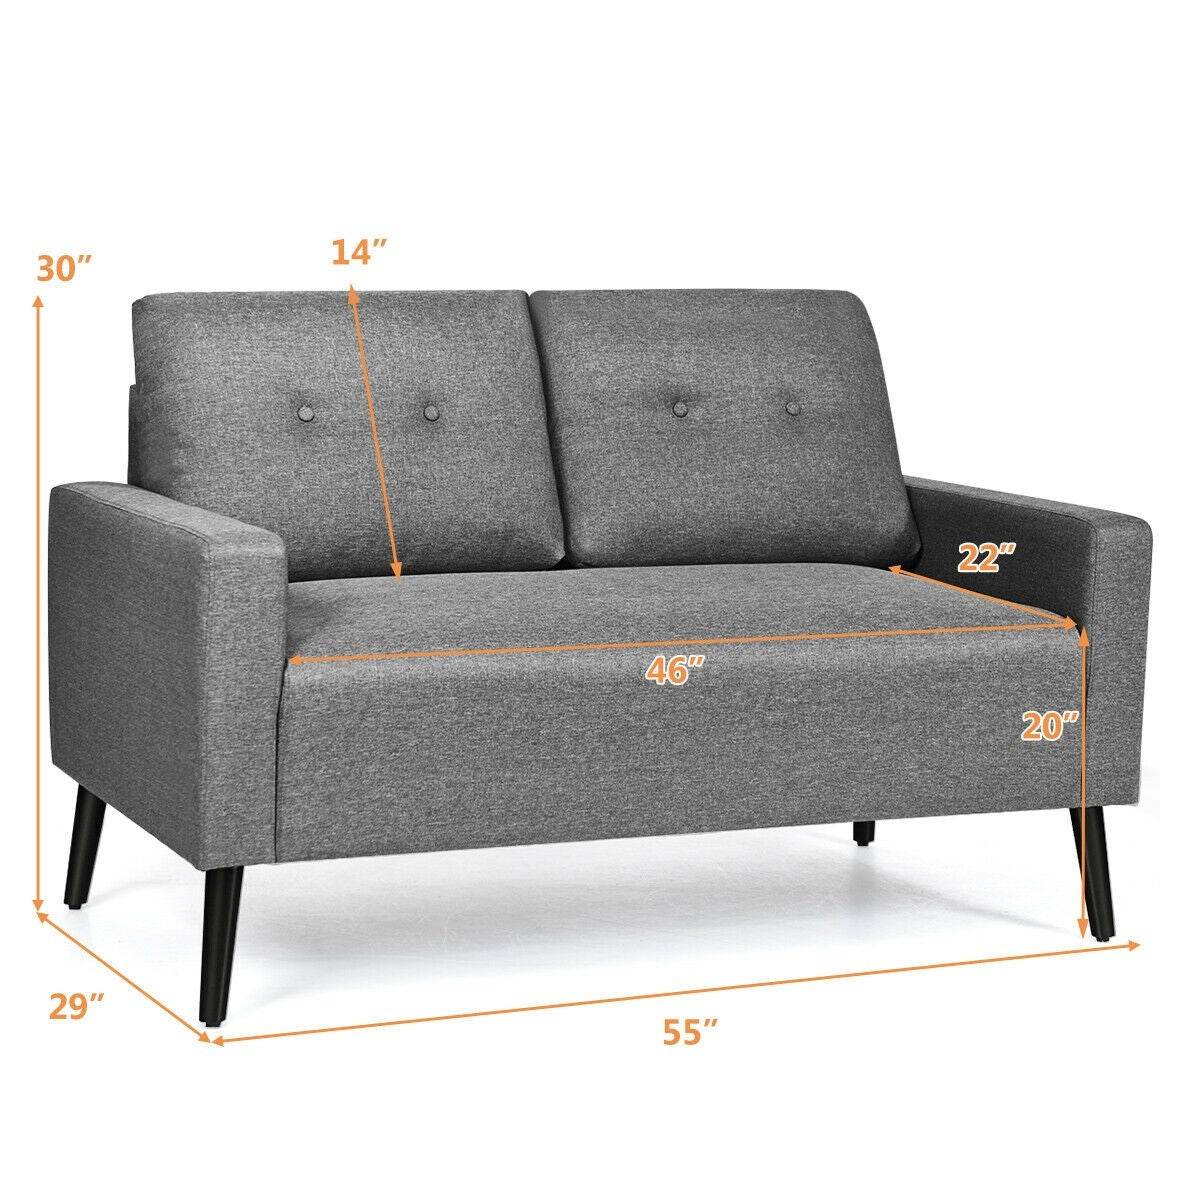 Giantex Modern Loveseat Sofa, 55" Upholstered Sofa Couch w/ Soft Cushion, Rubber Wooden Legs (Gray)